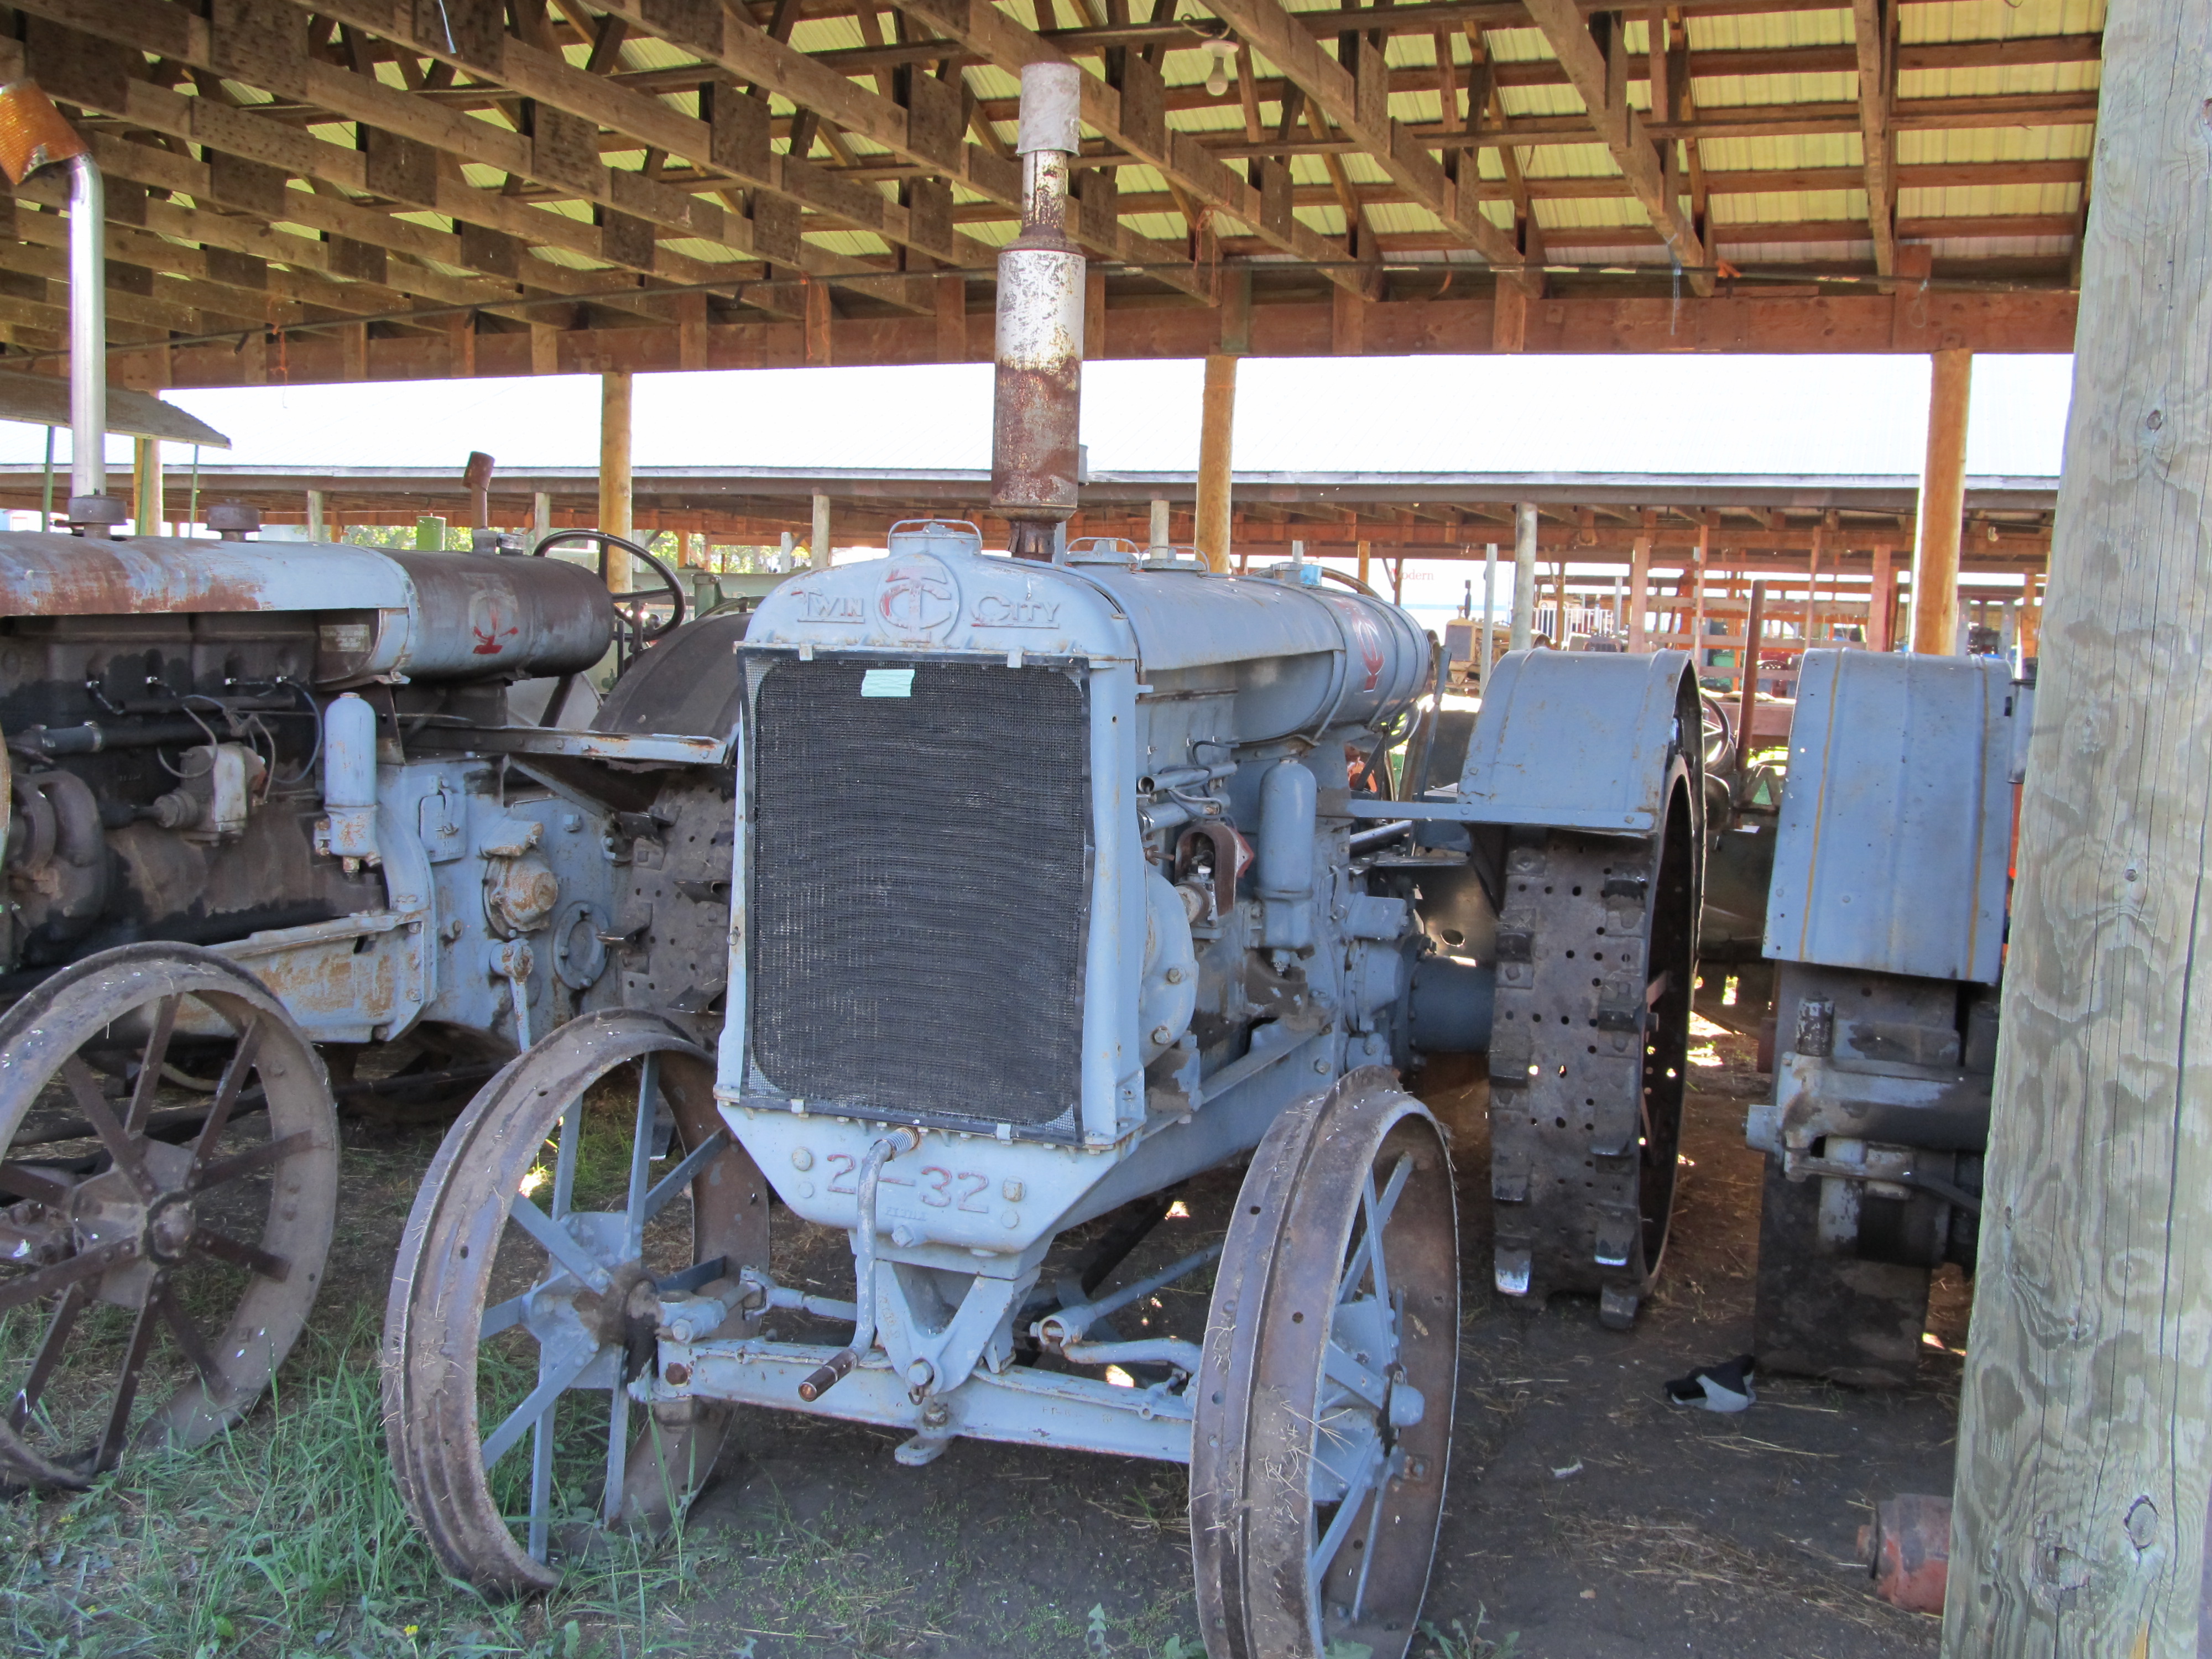 ... Steel & Machinery Company Twin City 21-32 tractors in the collection